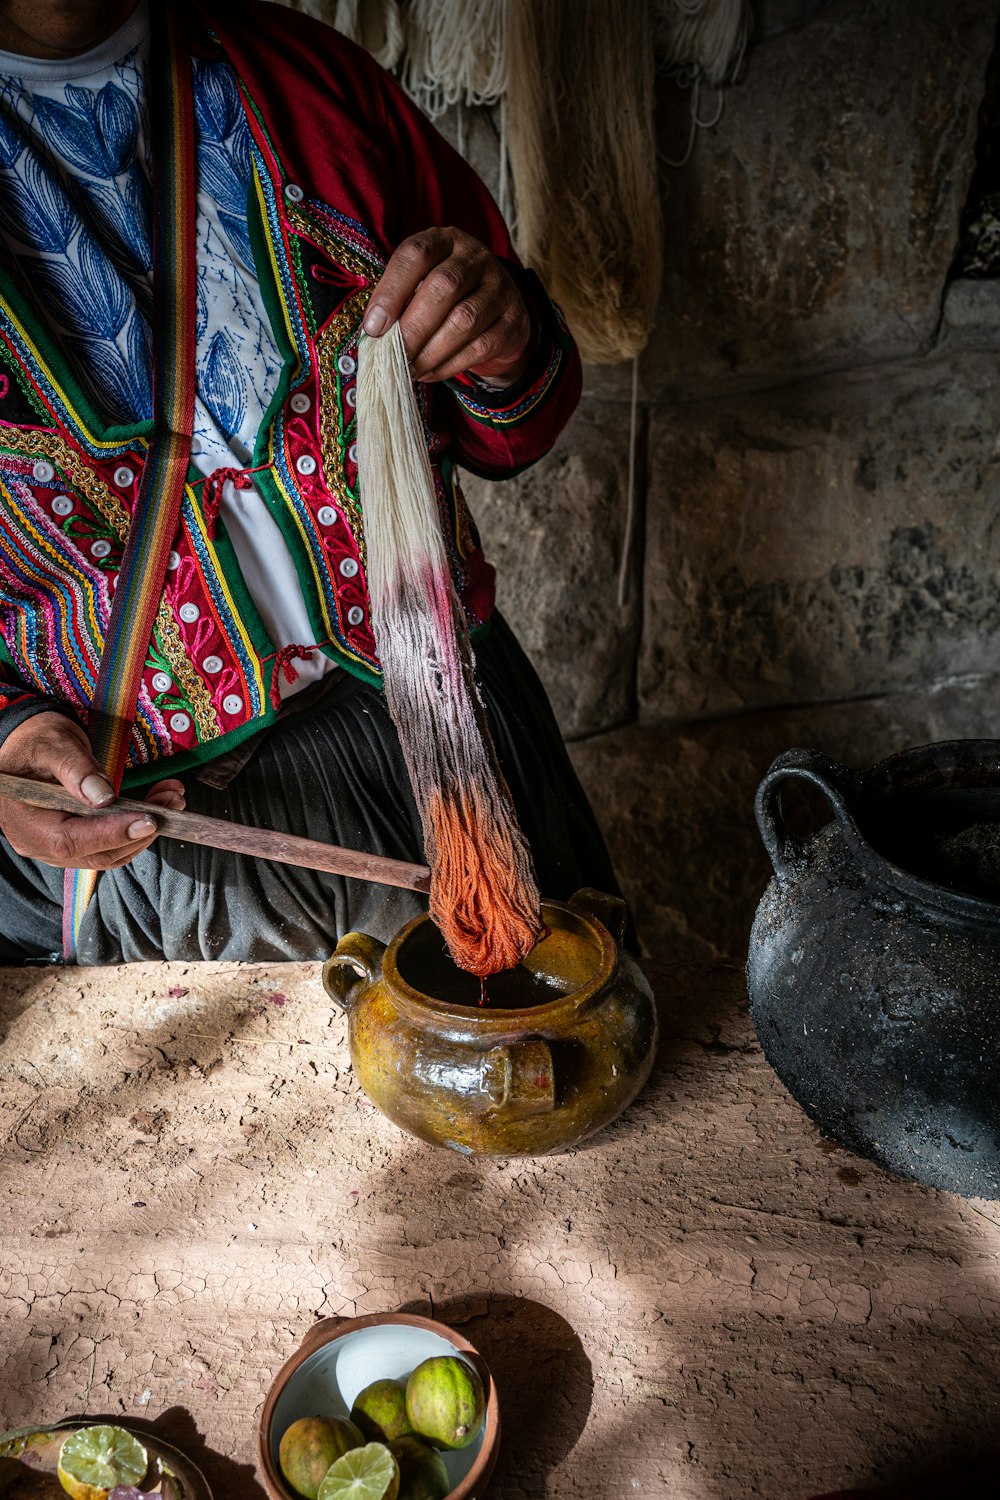 a woman in a colorful jacket is stirring a bowl of fruit